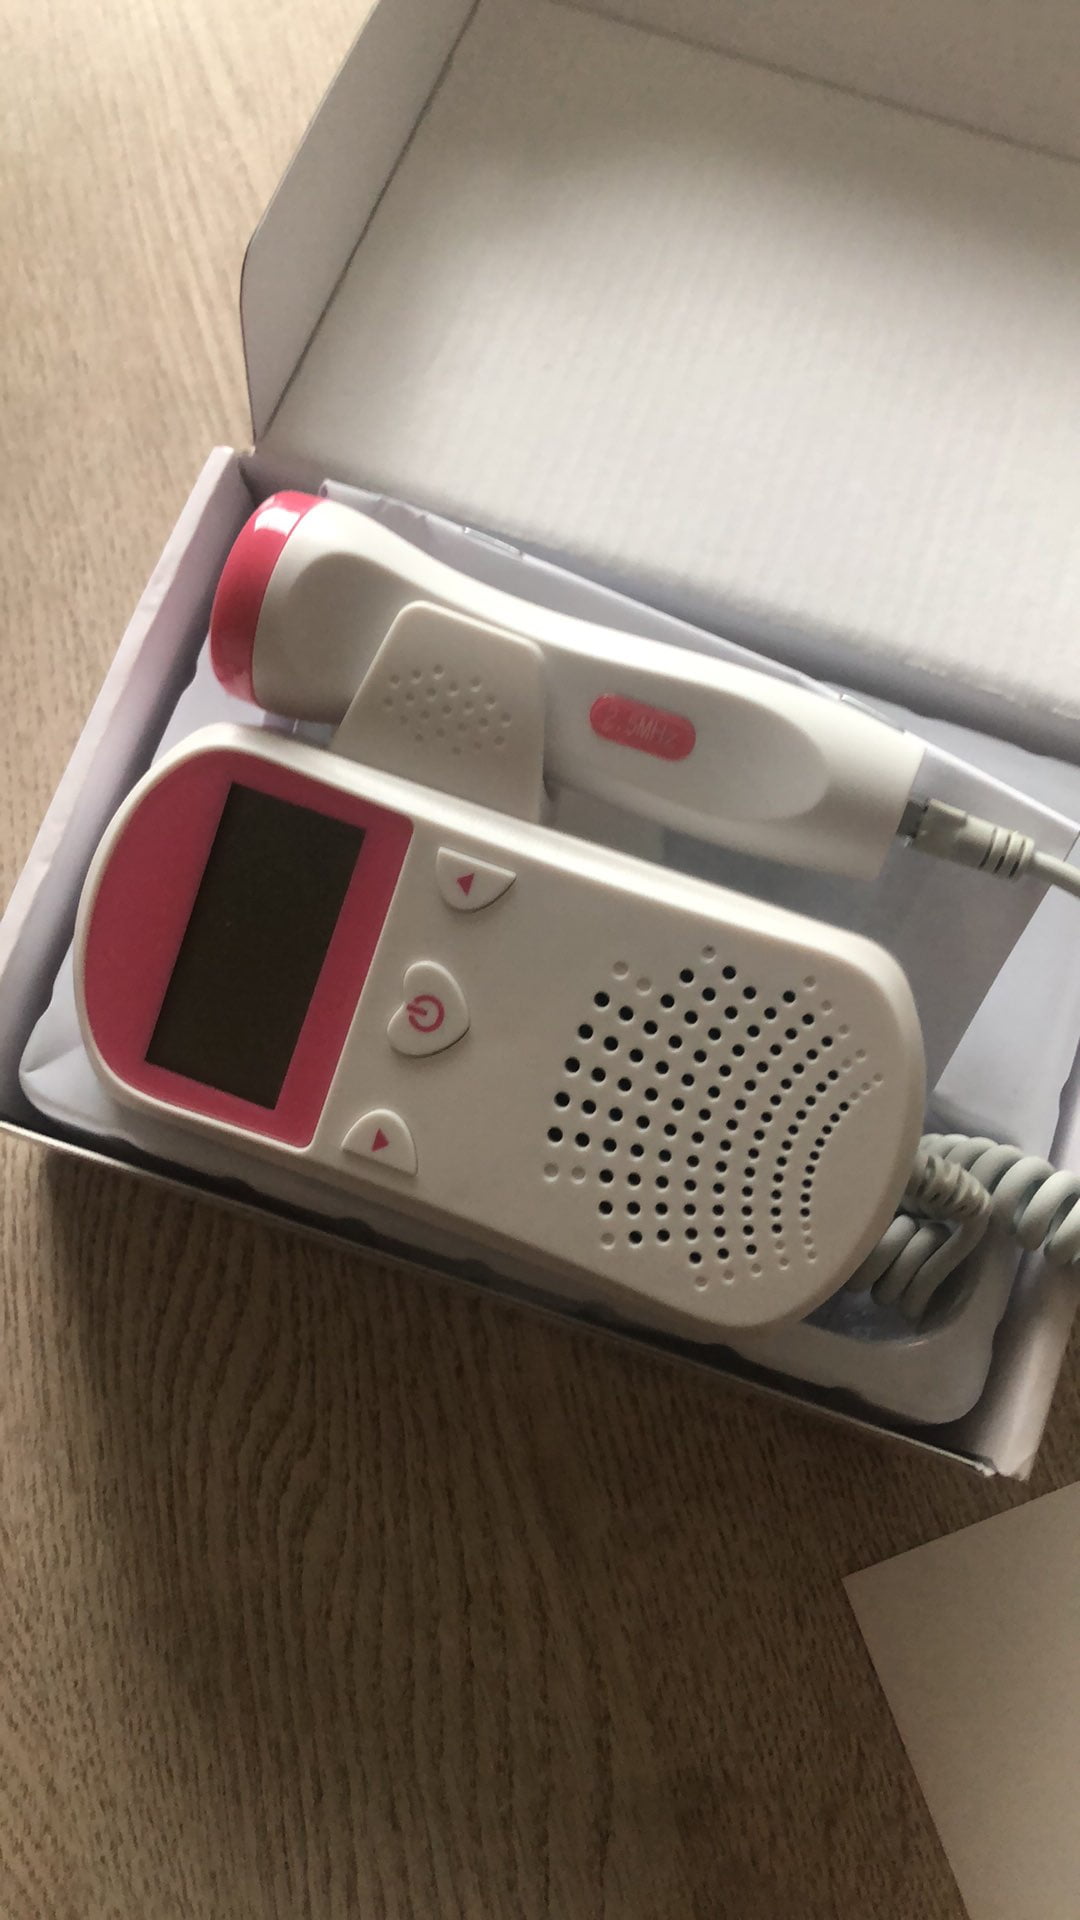 Baby Fetal Doppler - Heartbeat Rate Monitor with LCD Display And Speaker photo review